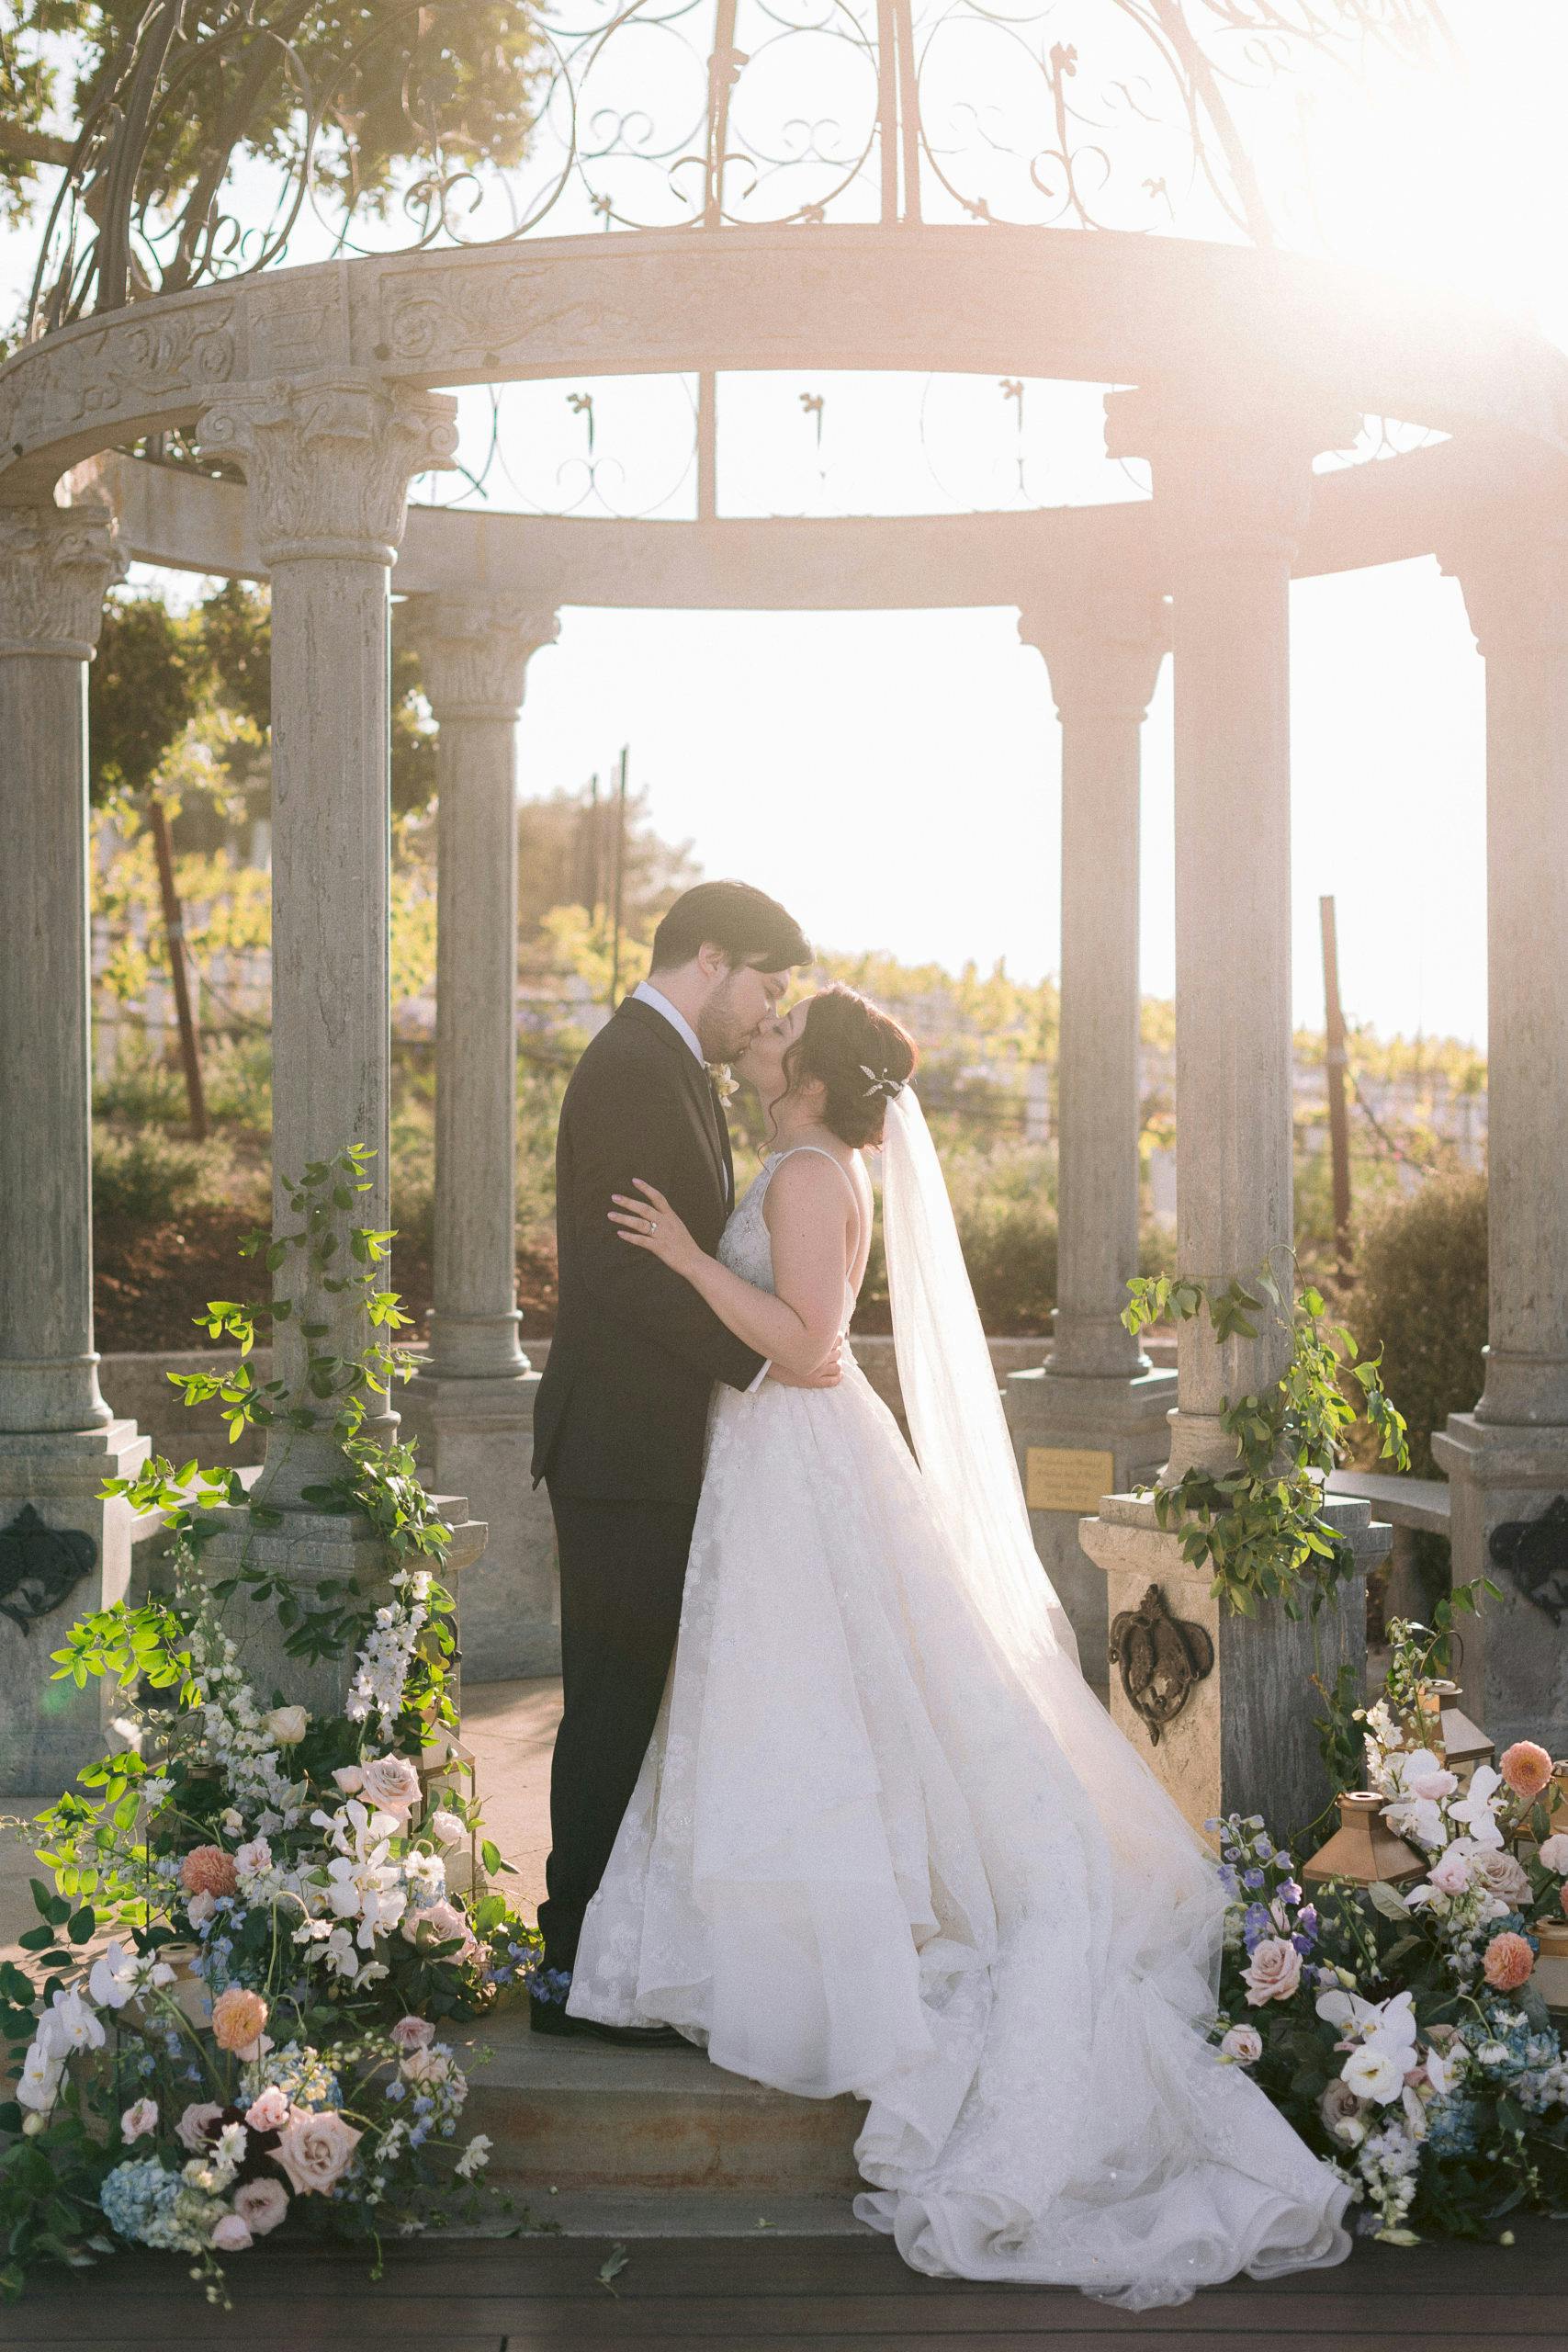 Enchanting and Timeless Wedding at The Meritage Resort and Spa in Napa, California | PartySlate